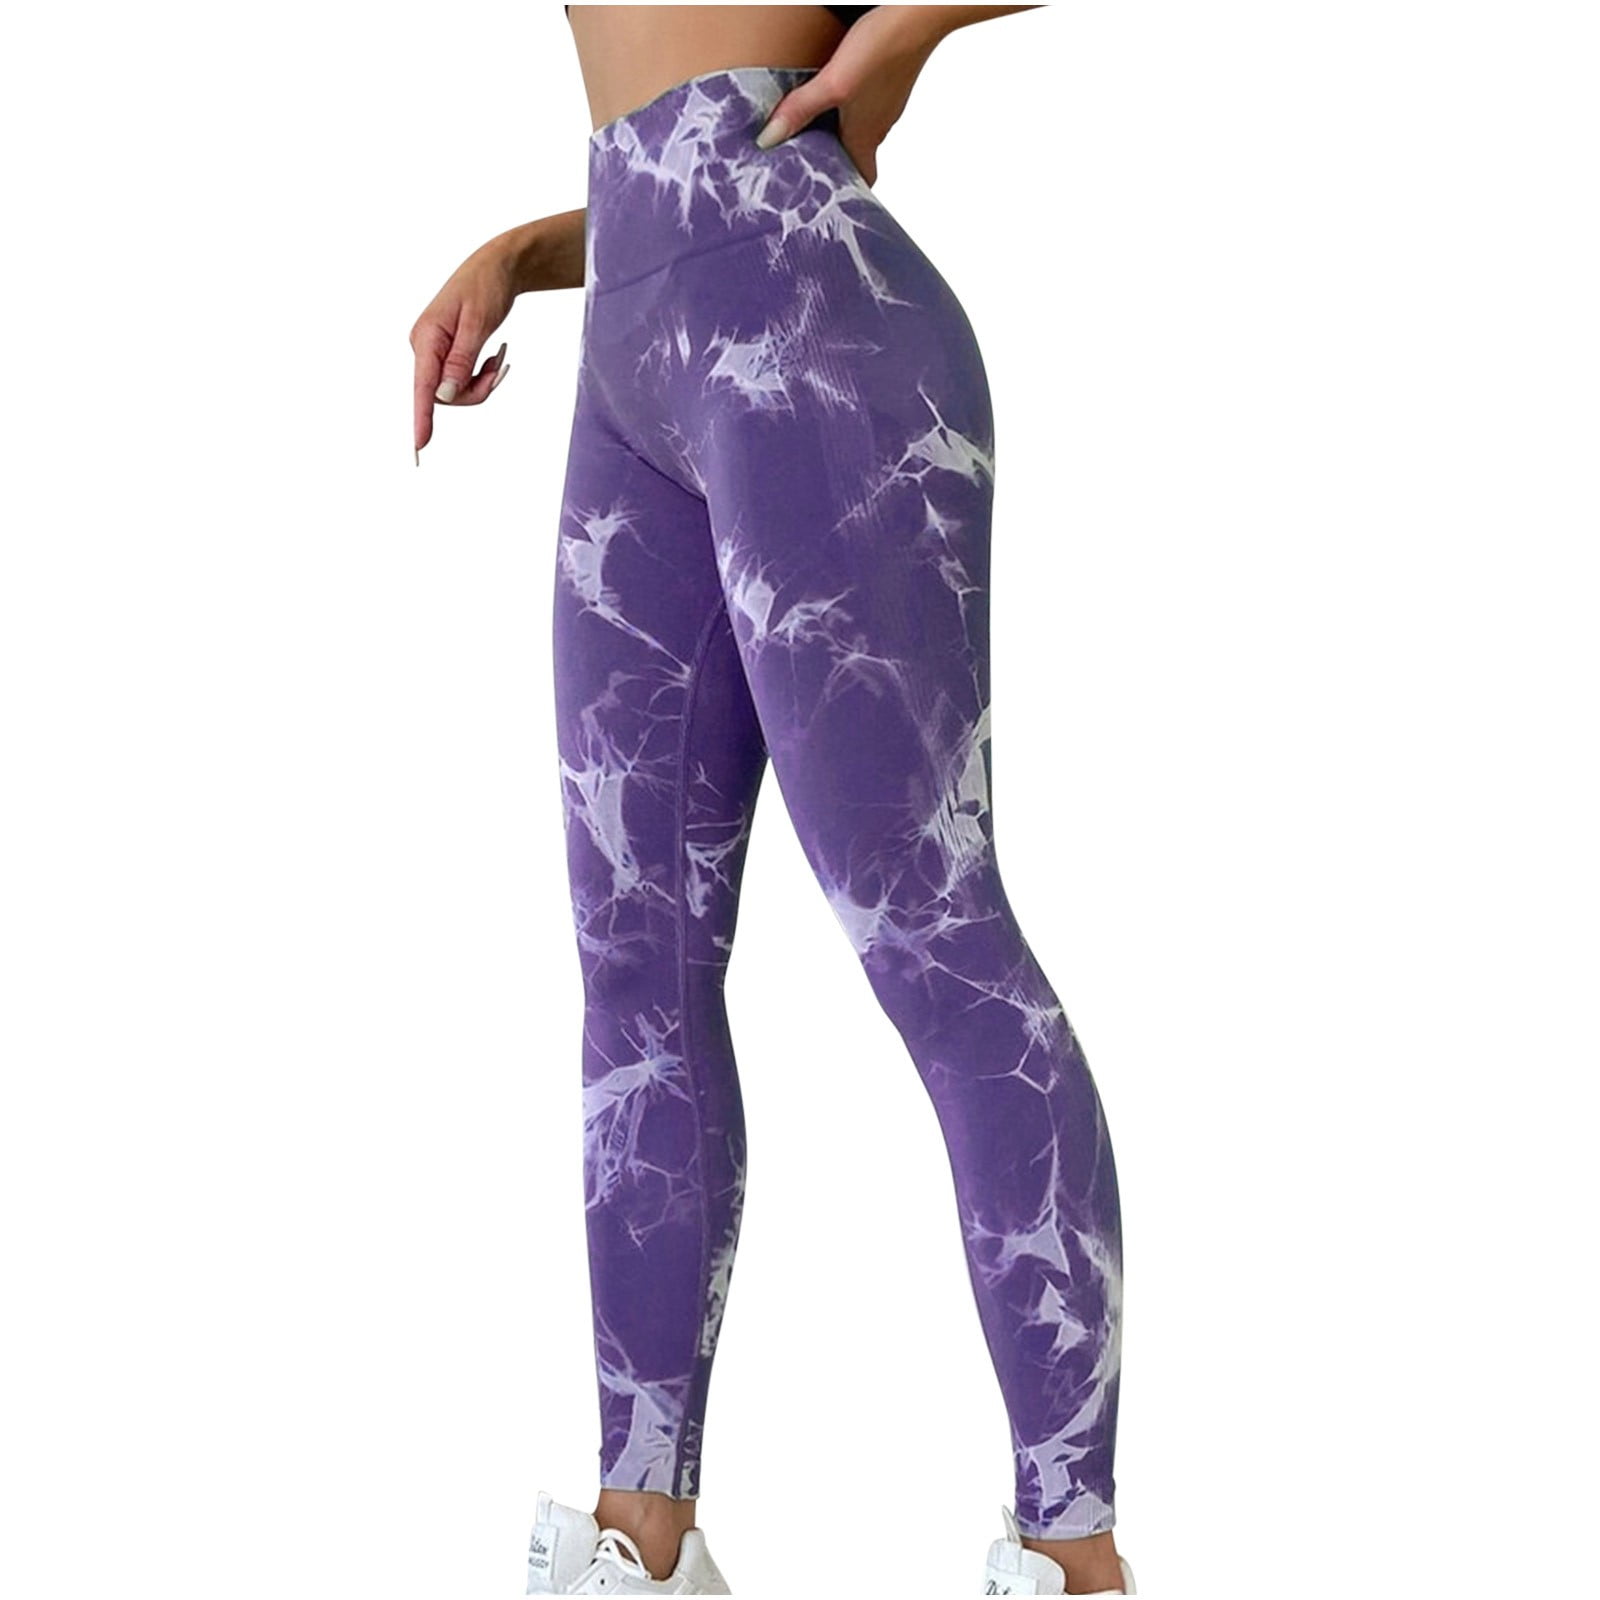 RQYYD Scrunch Butt Lift Leggings for Women Tie Dye High Waist Seamless  Workout Yoga Pants Ruched Booty Compression Tights Gray M